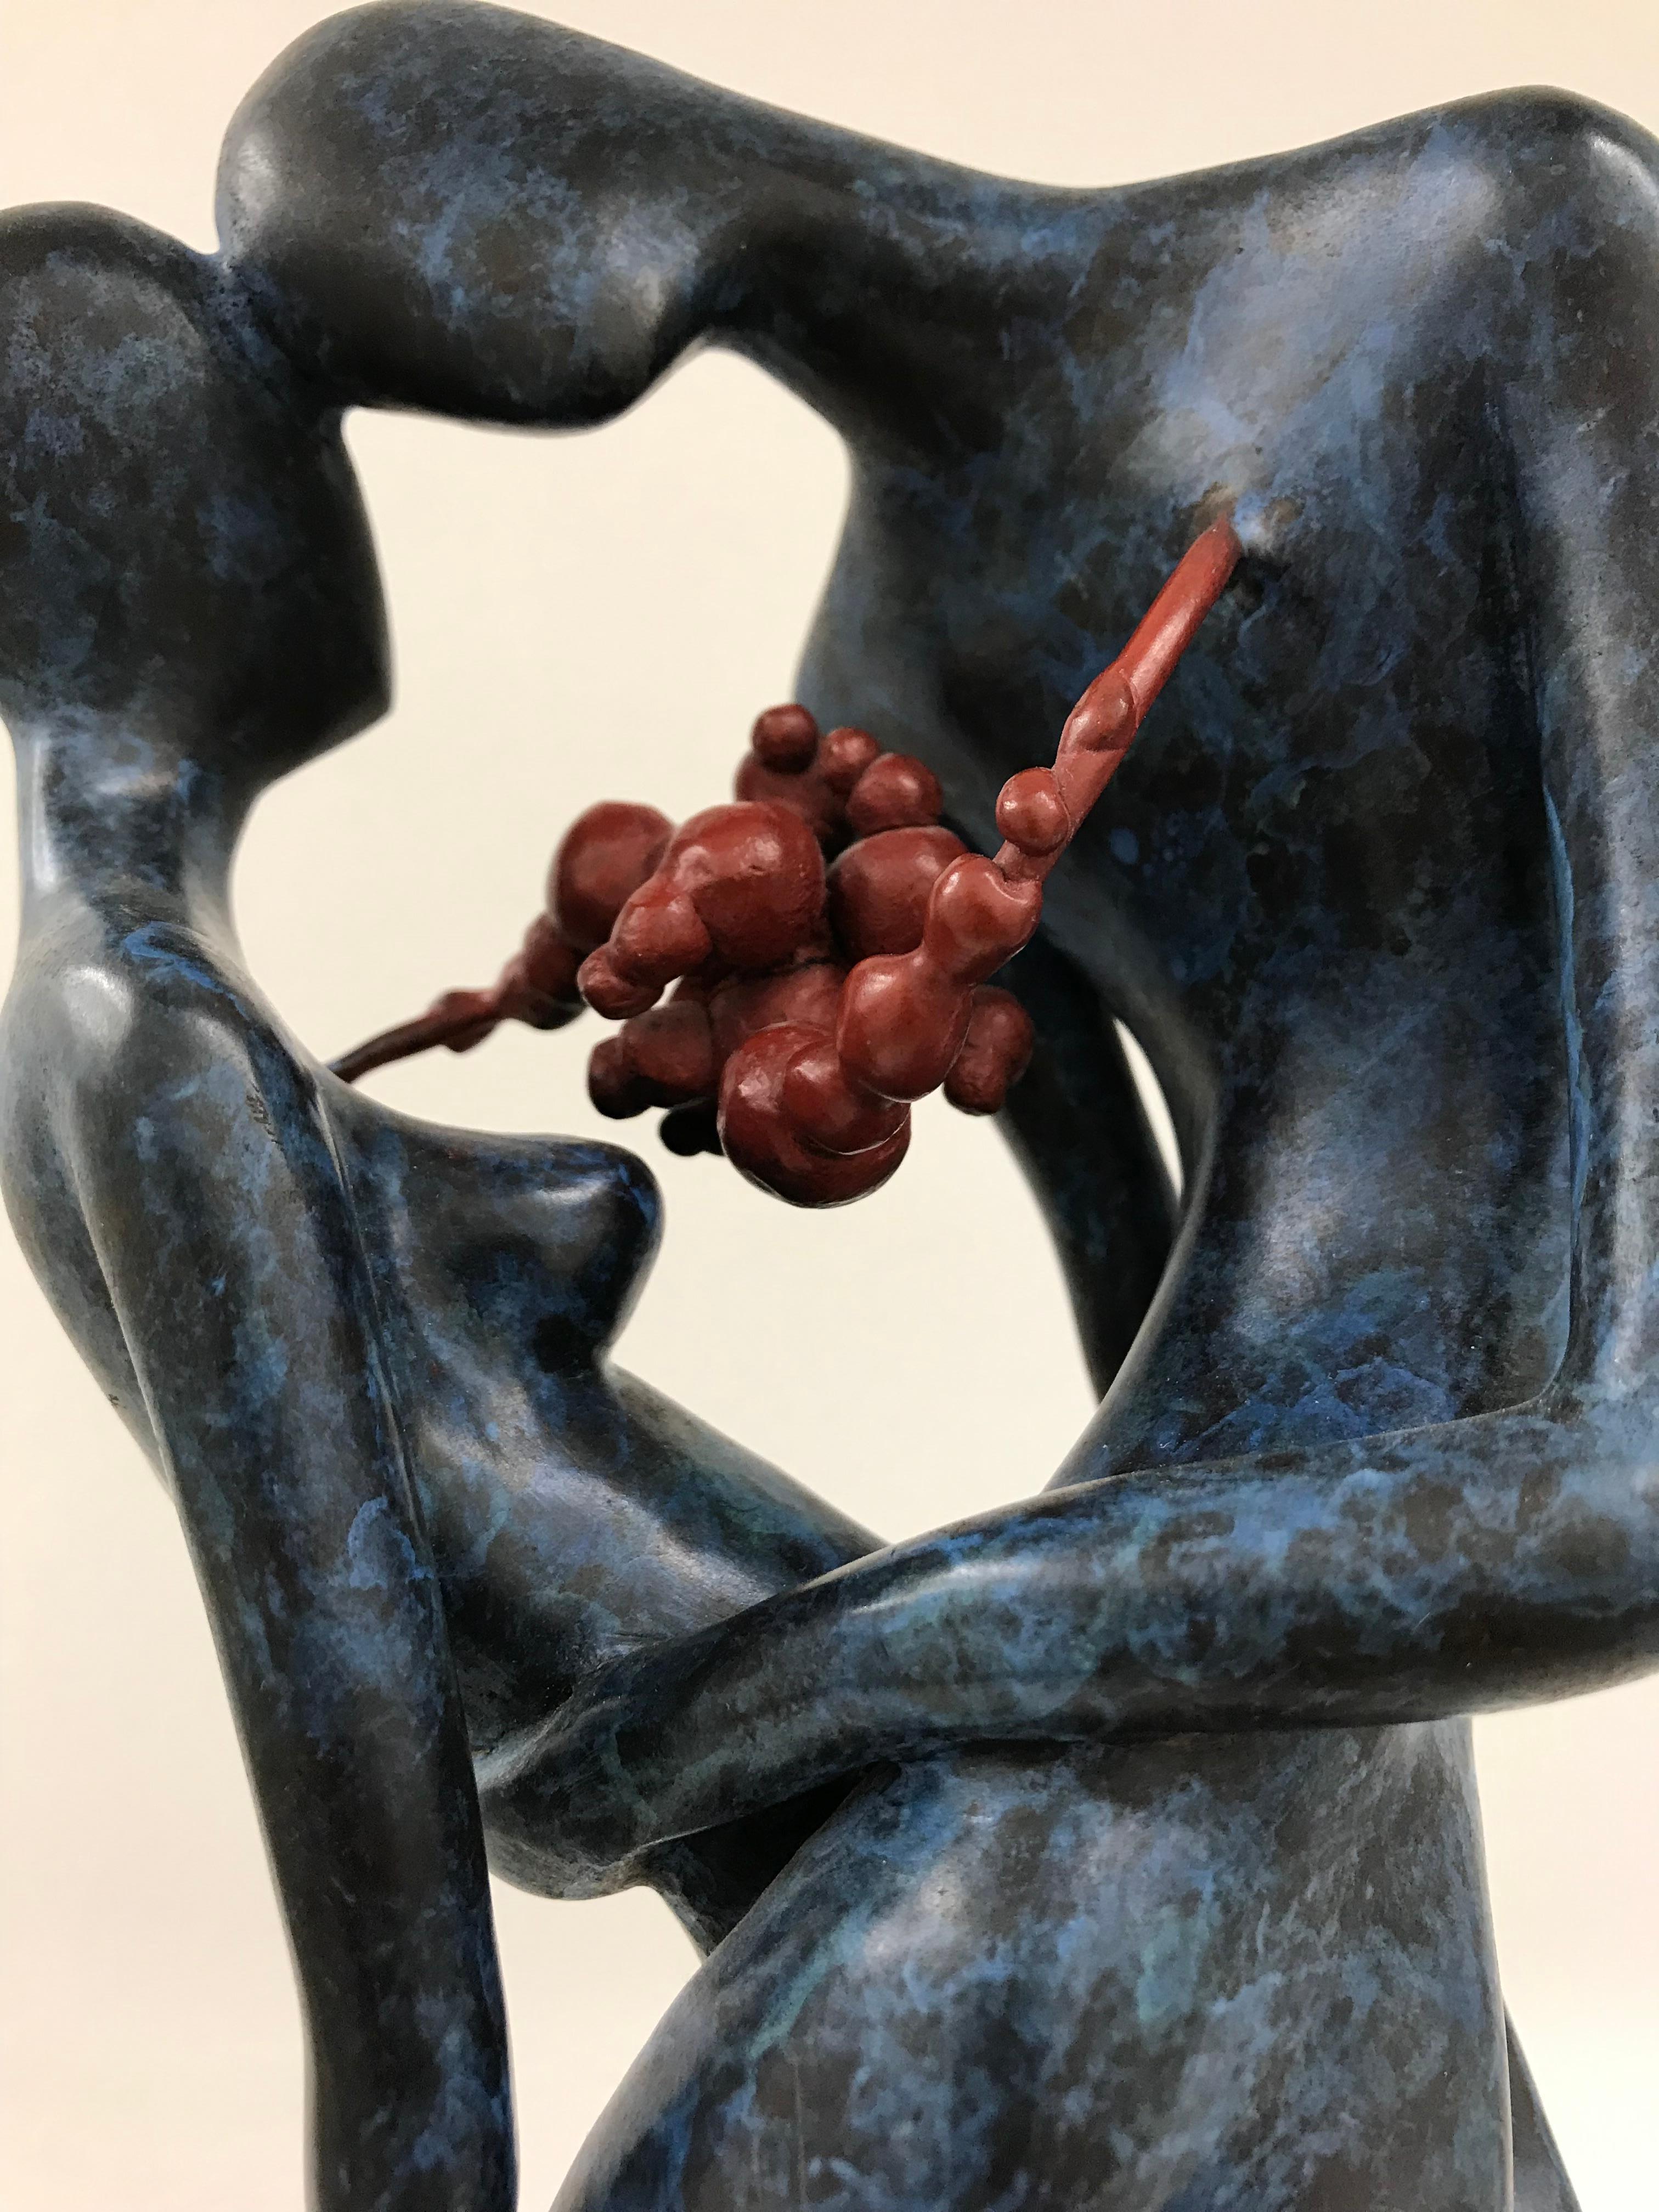 Love, Man and Woman : Contemporary, figurative bronze sculpture, blue and red - Sculpture by Garn Kwankaew